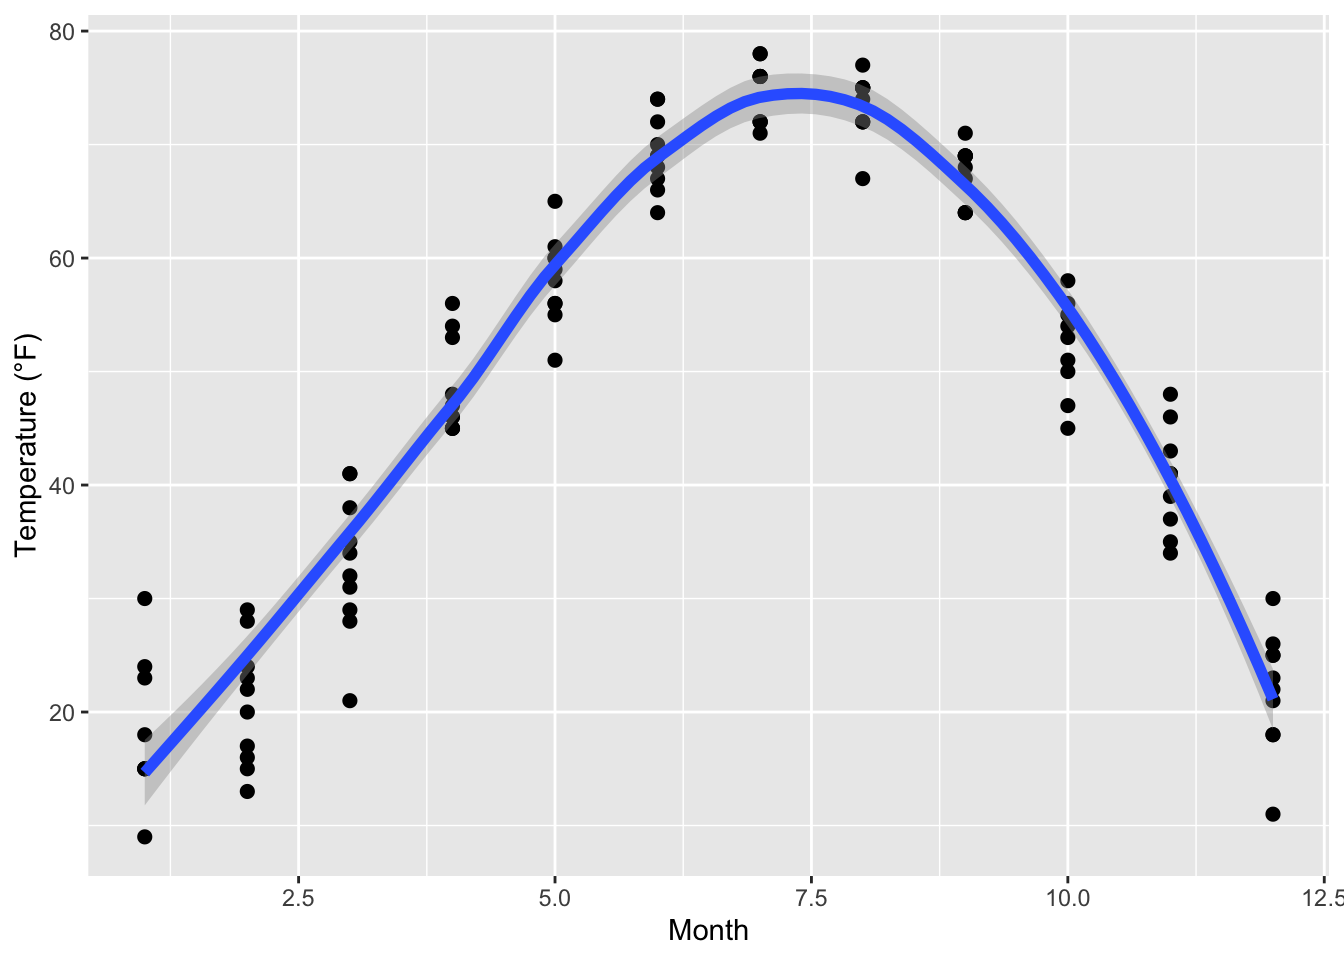 Temperature usage versus Month has a relationship that can't be captured by a straight-line model.